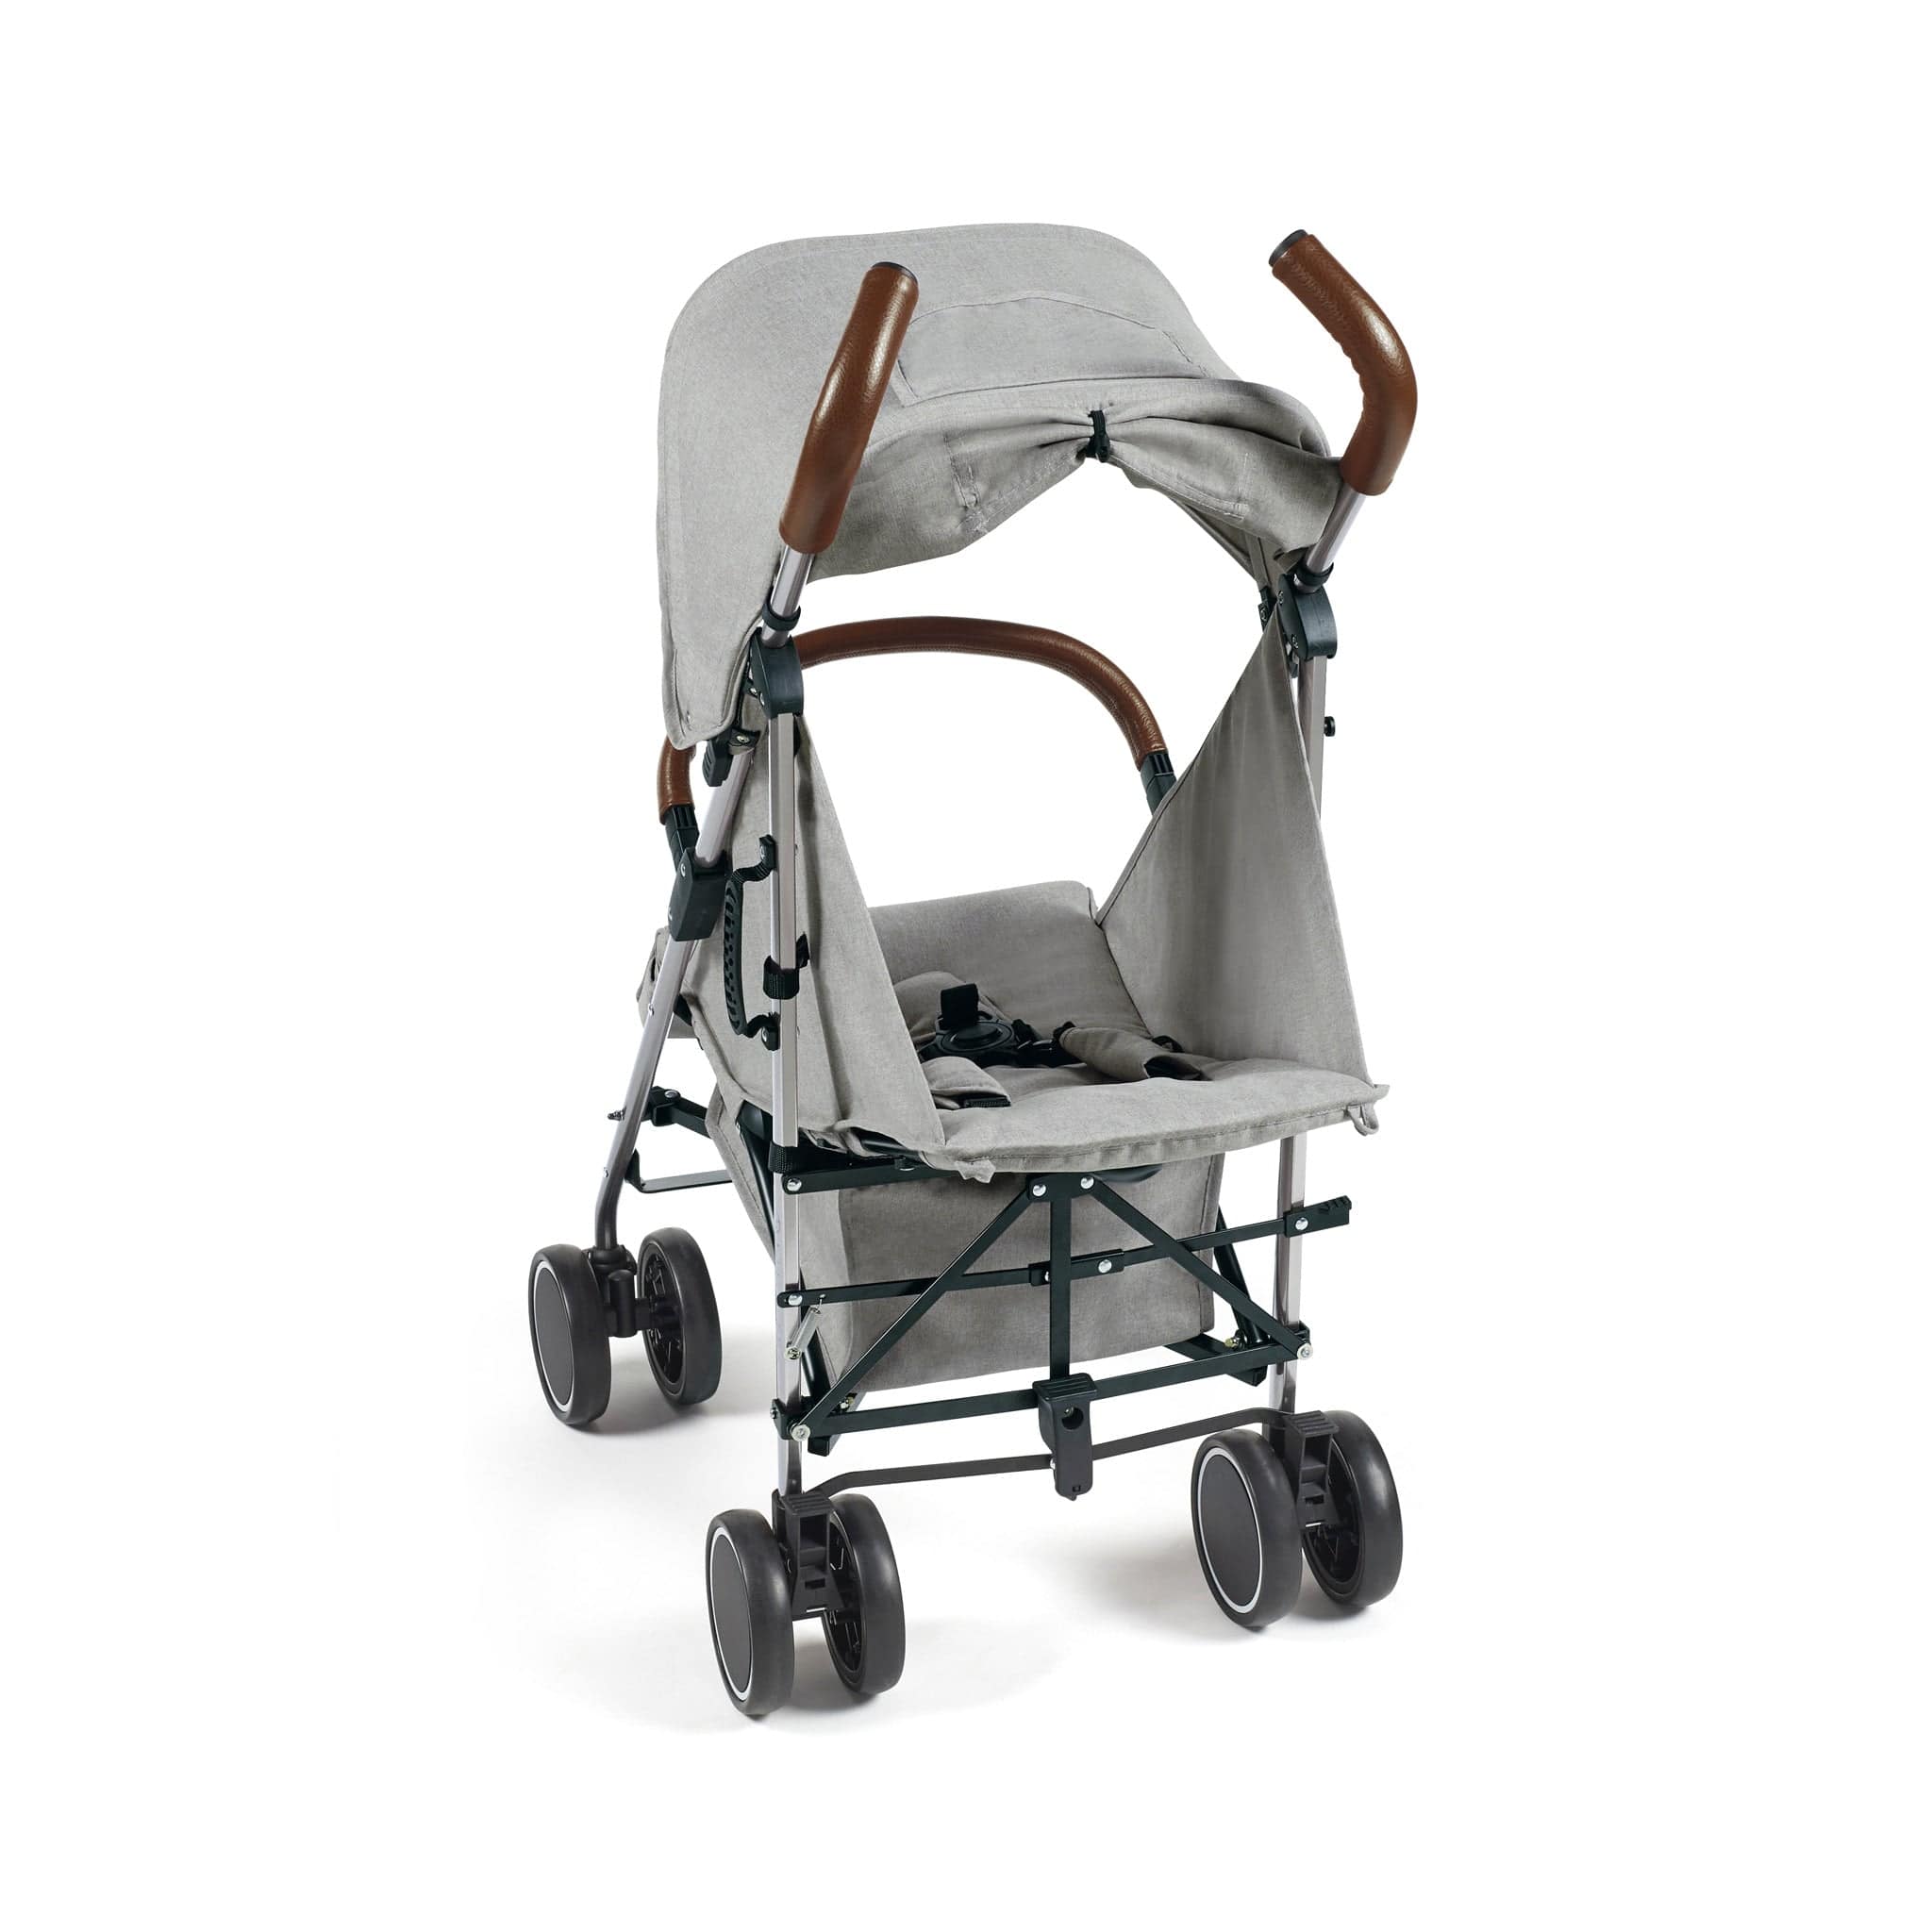 Ickle Bubba Discovery Prime Stroller Silver/Grey Pushchairs & Buggies 15-002-300-056 0700355999423